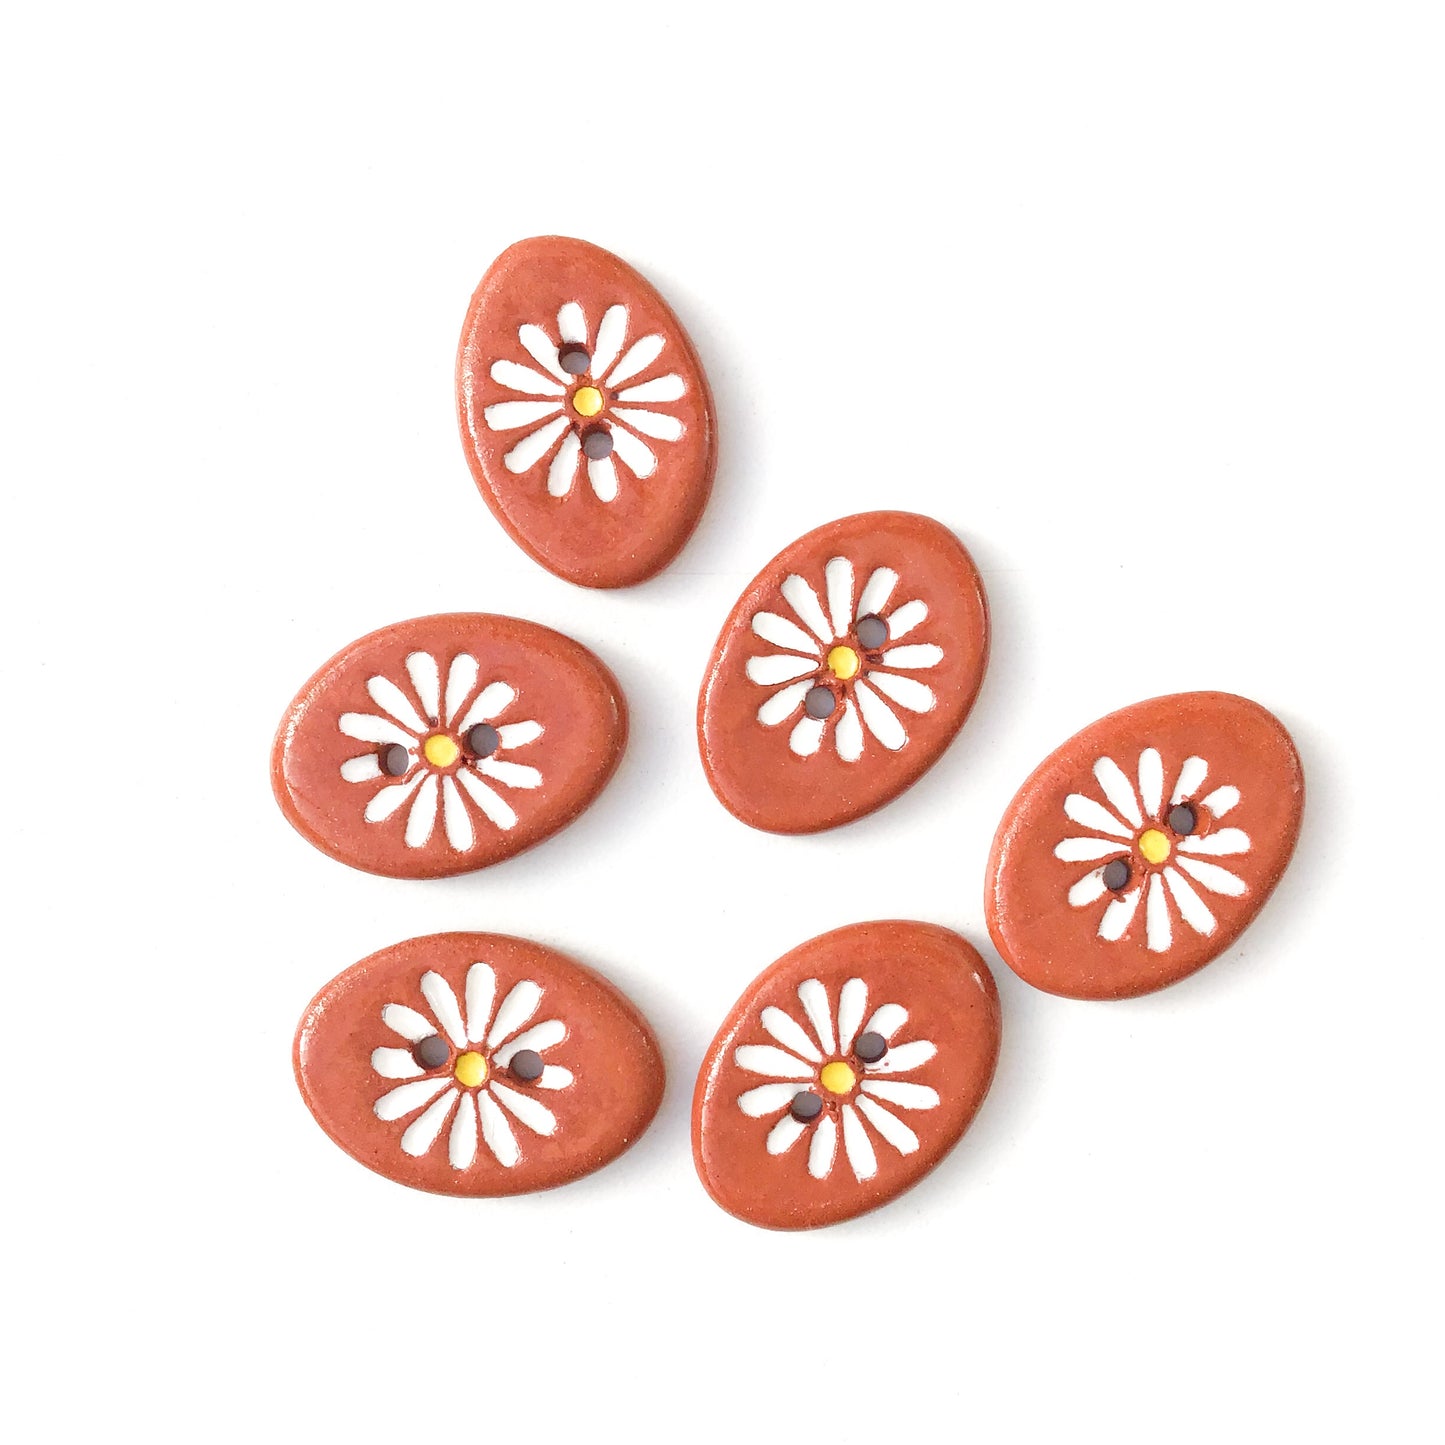 White Daisy Buttons on Red Clay - Ceramic Flower Buttons - 5/8" x 7/8"